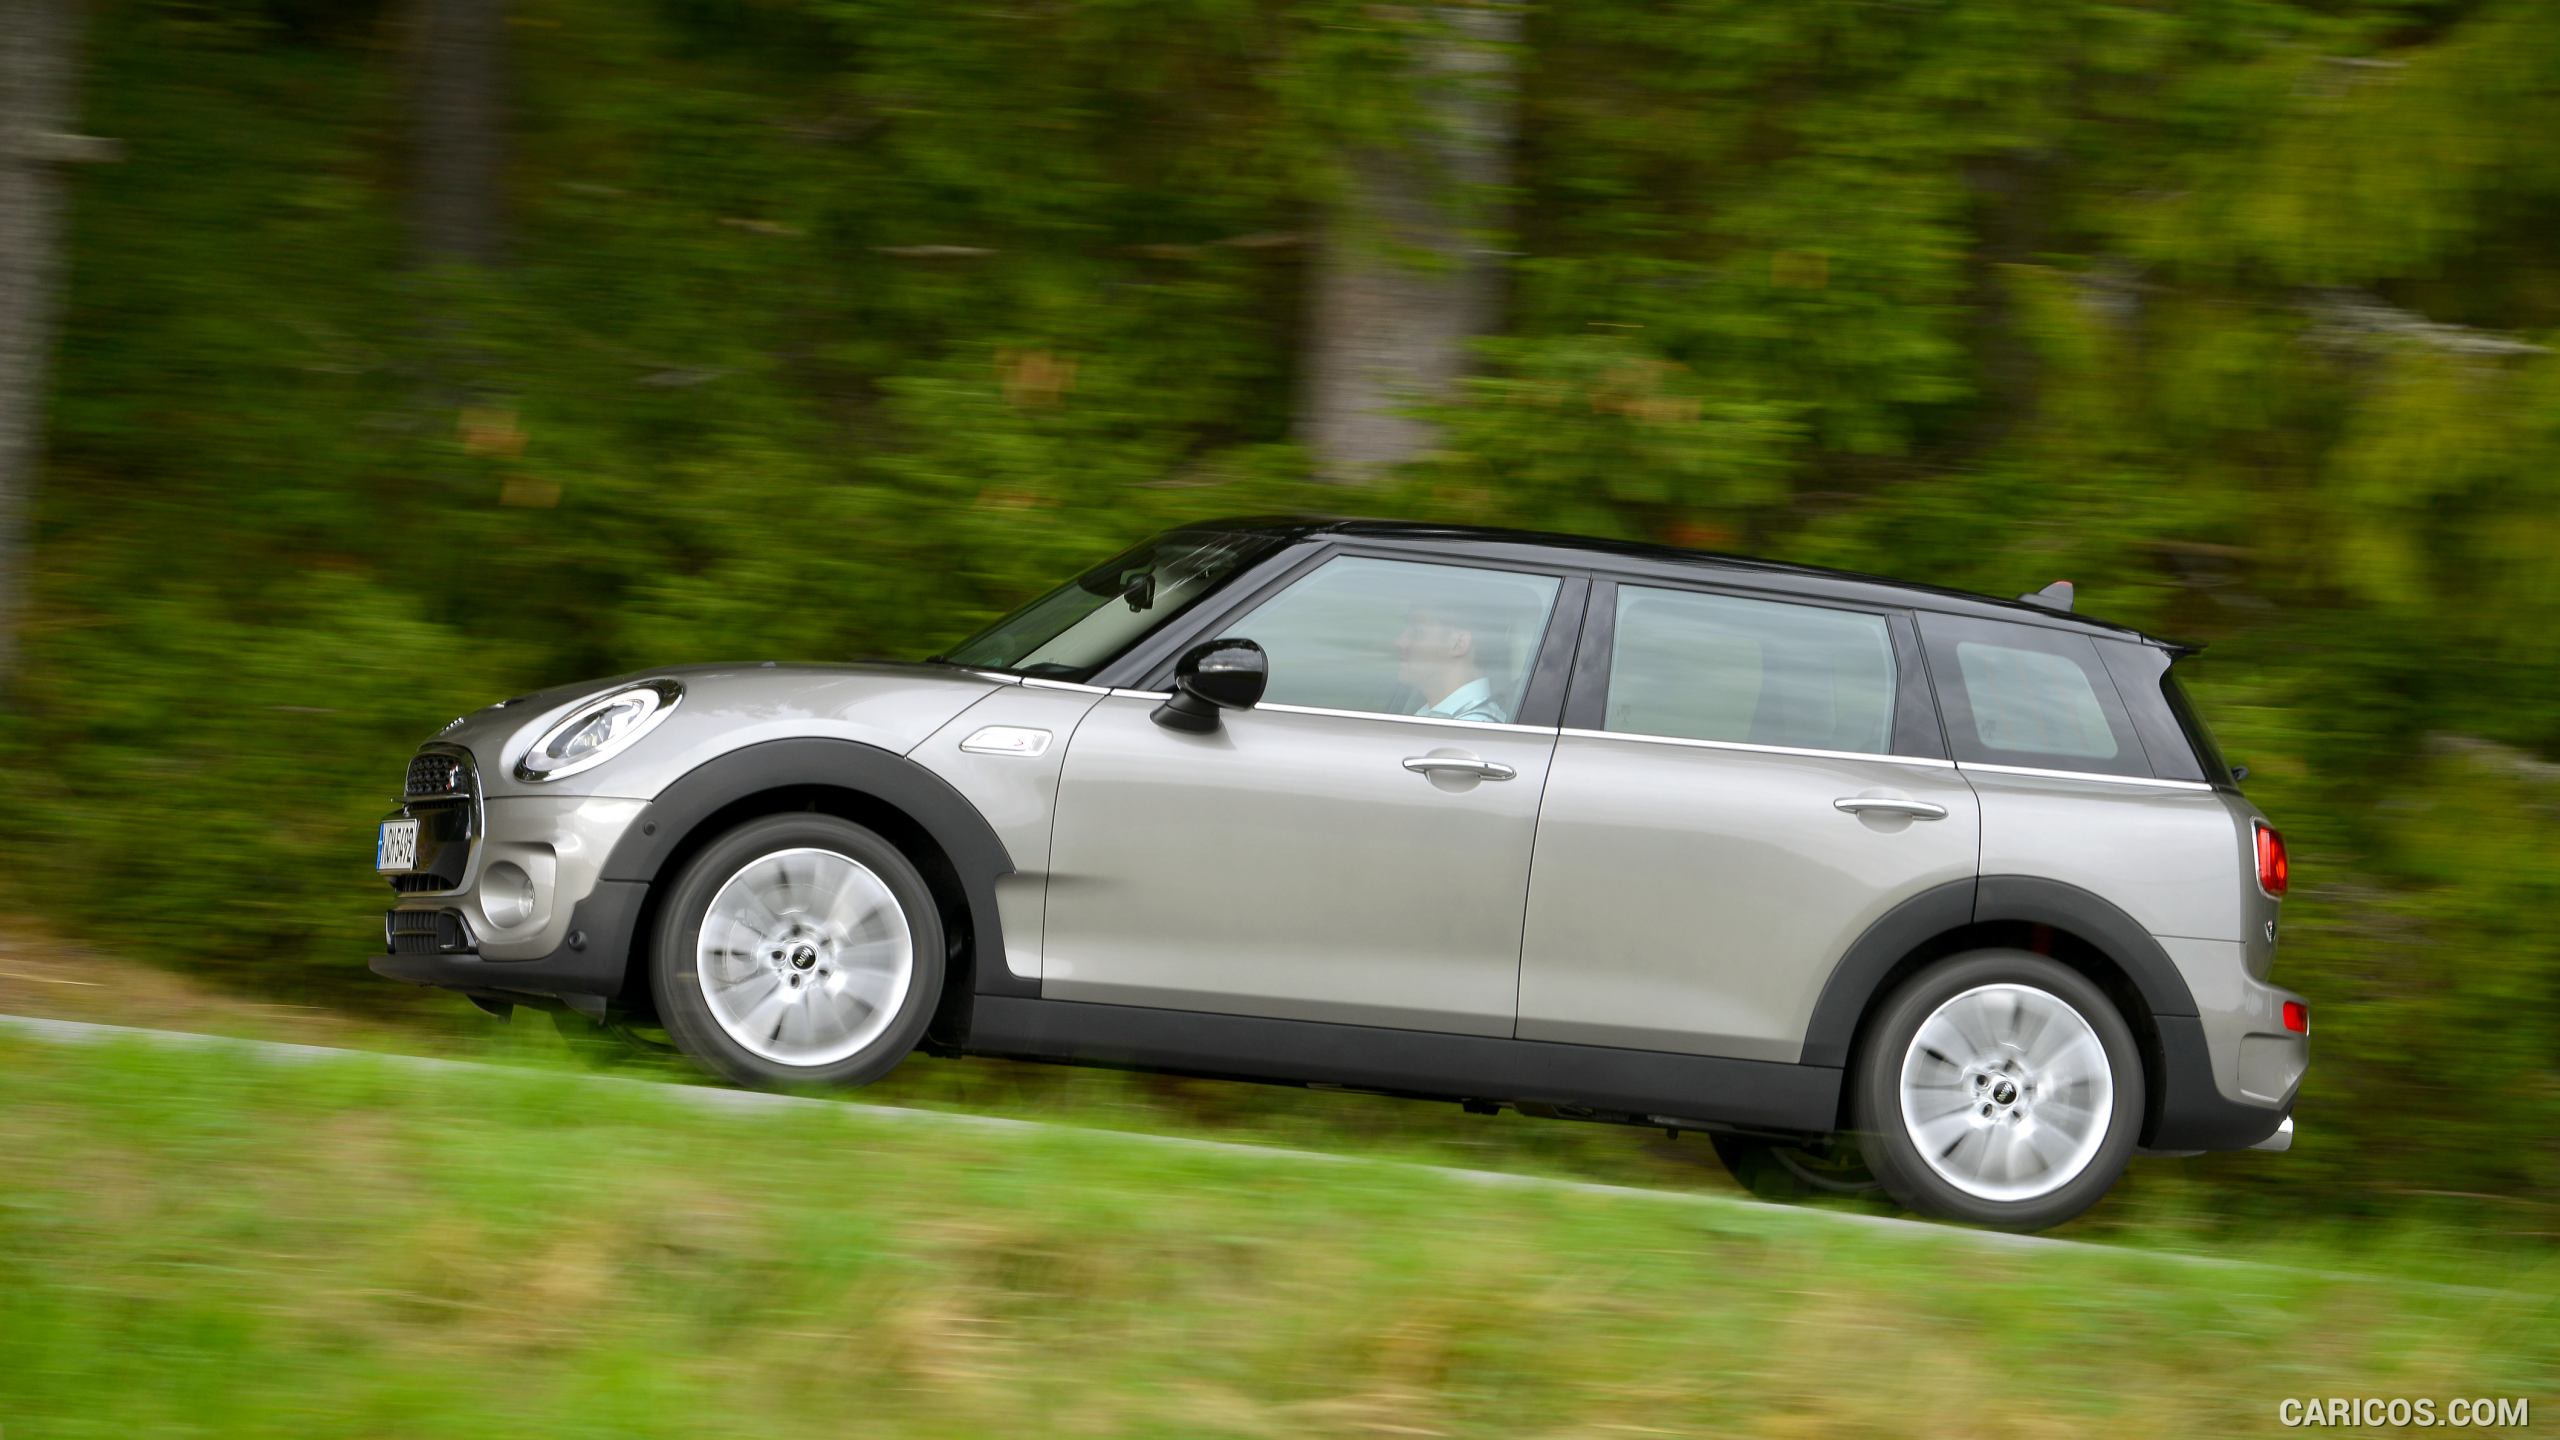 2016 MINI Cooper S Clubman in Metallic Melting Silver - Side, #157 of 380